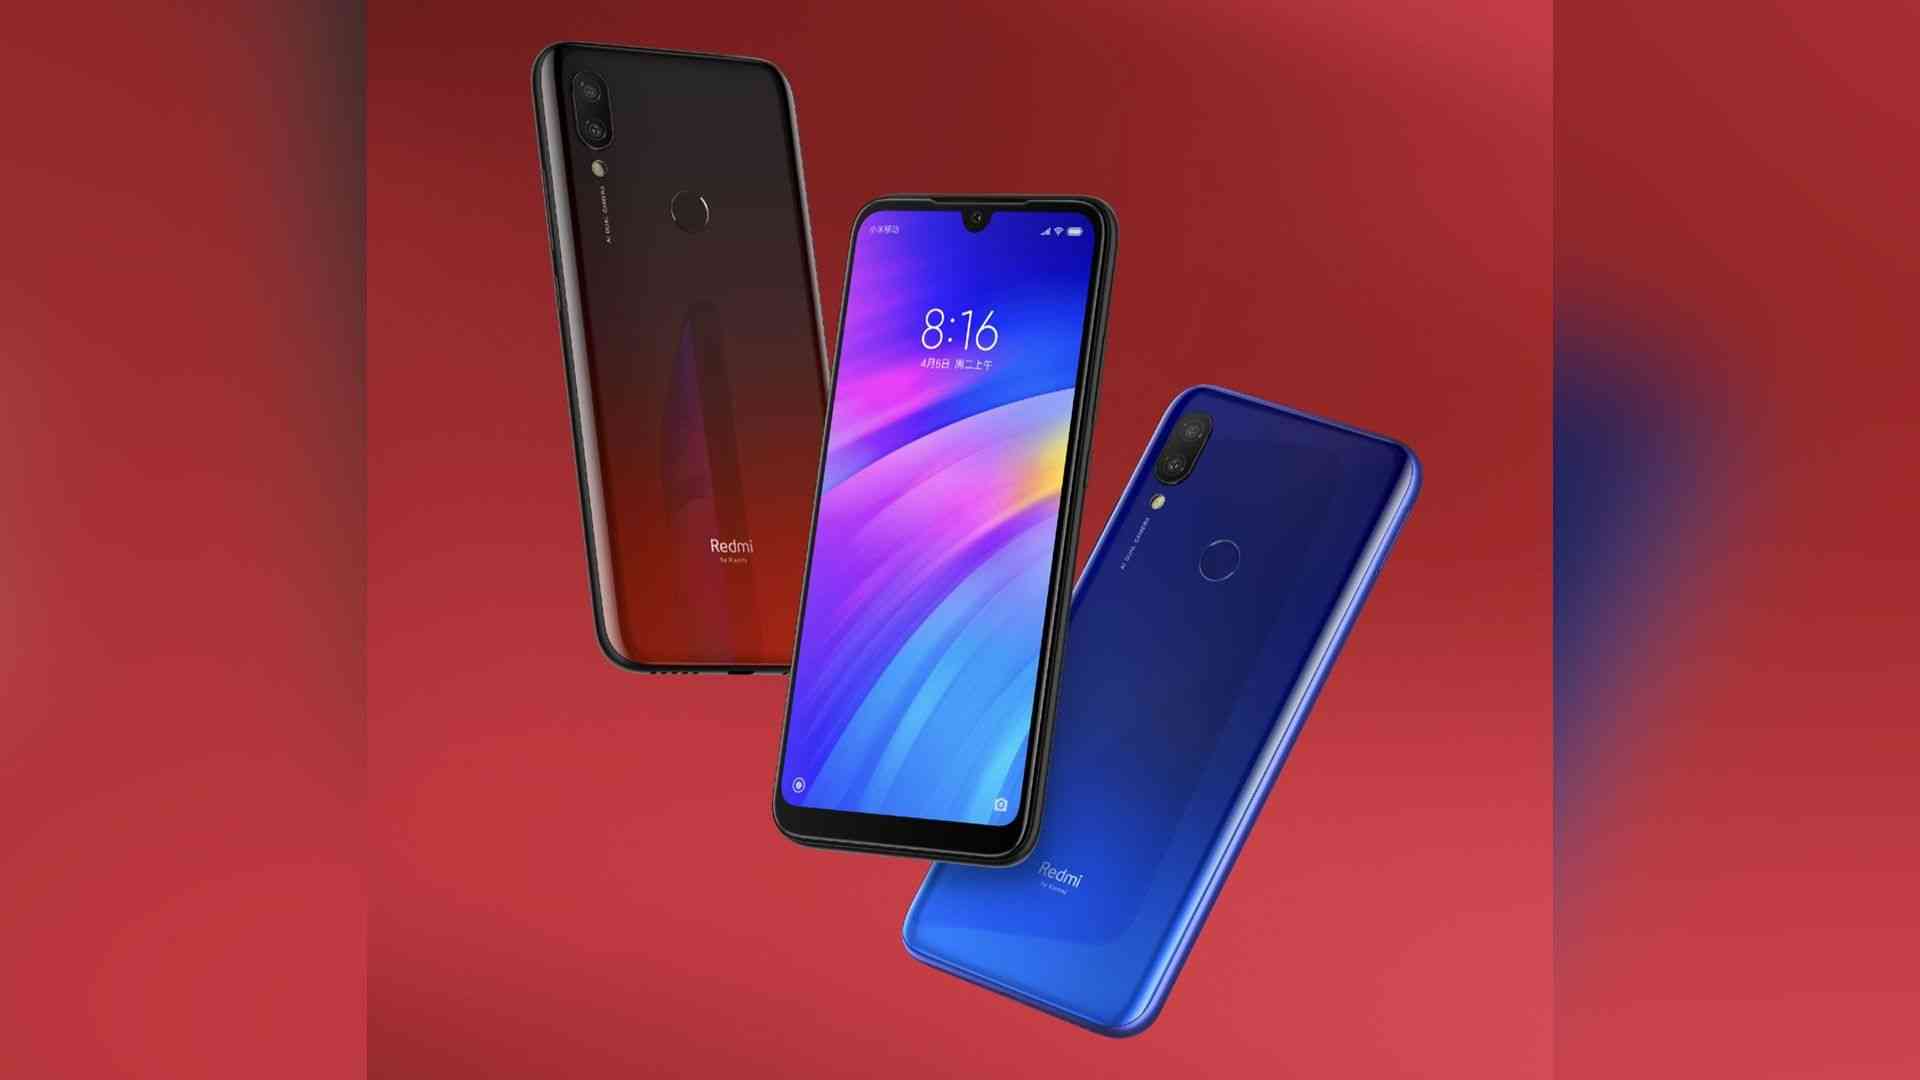 xiaomi redmi 7 review back to the basics with an affordable price tag 1980 big 1